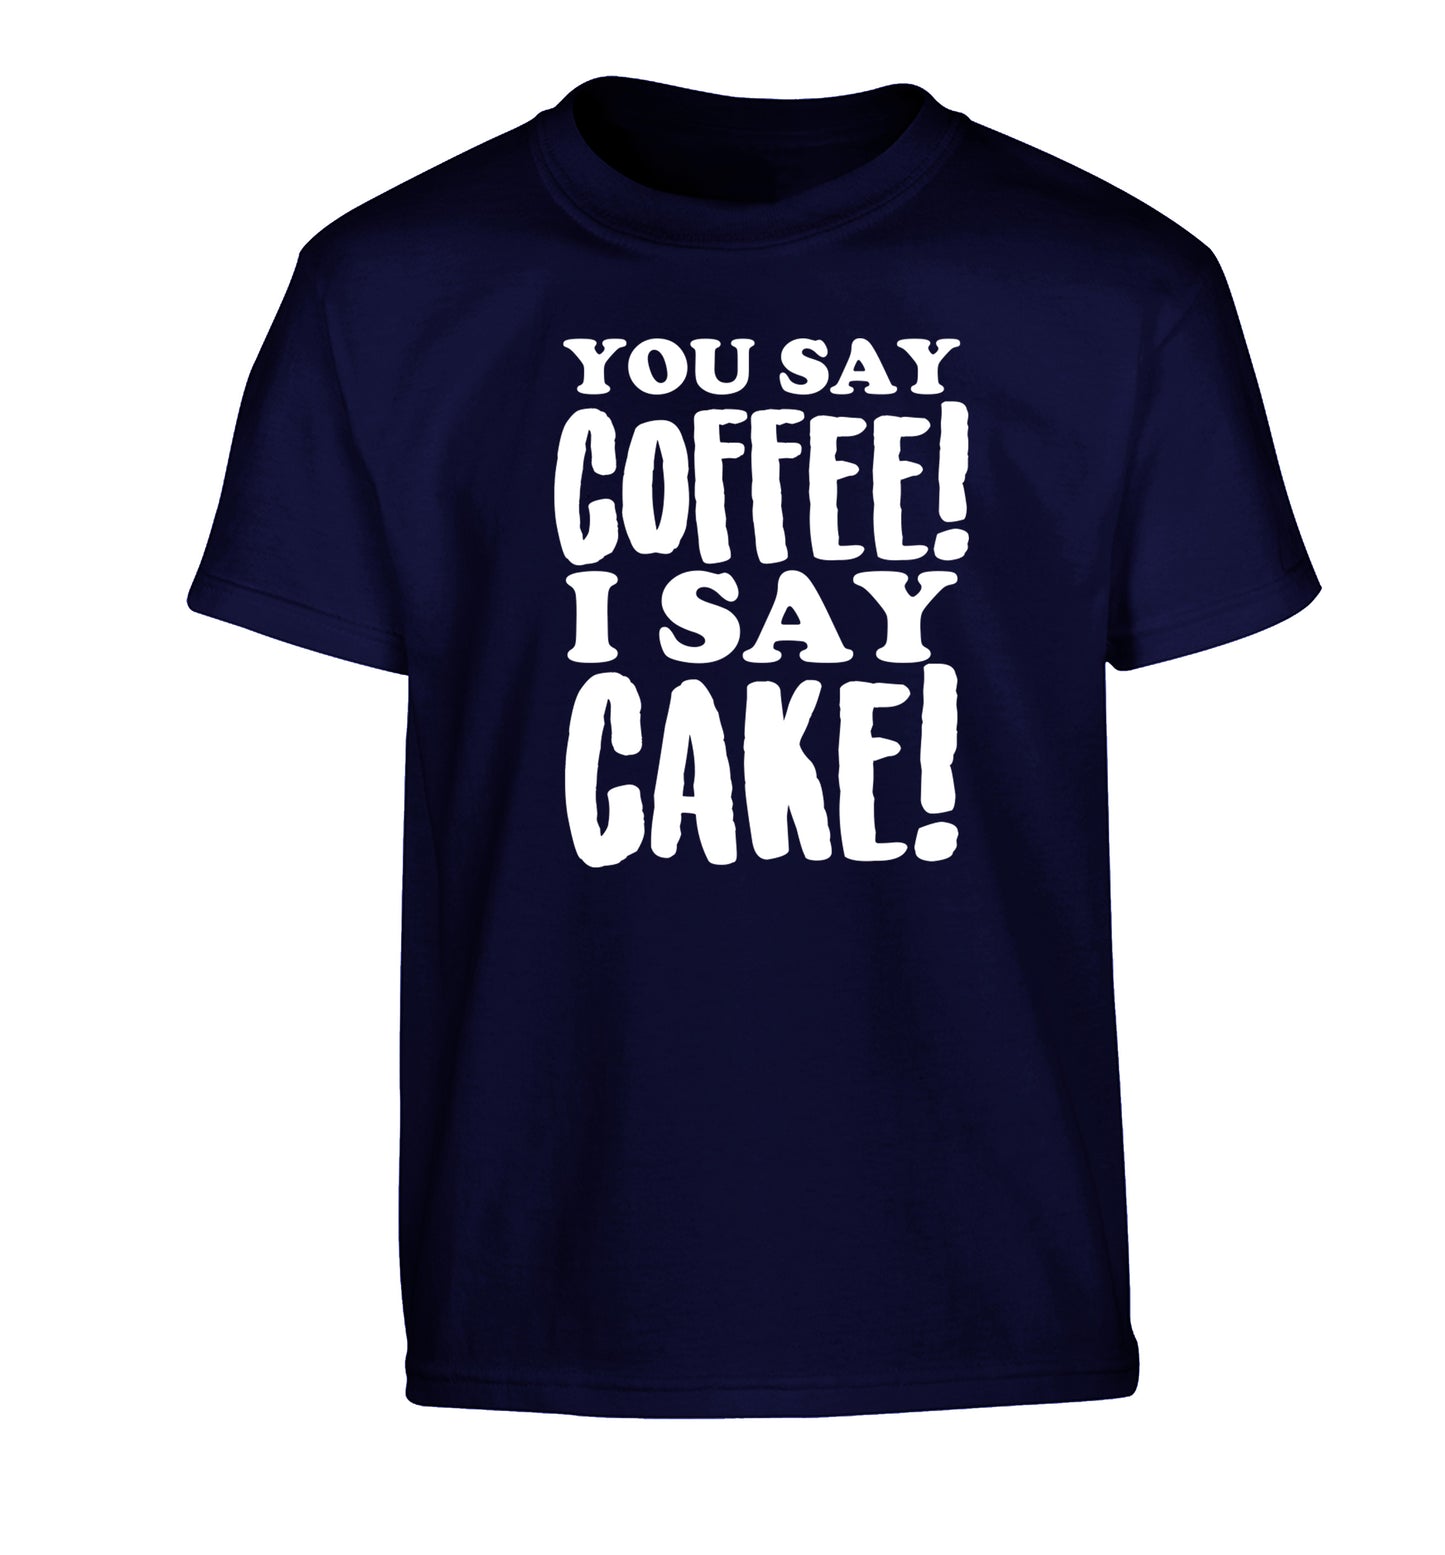 You say coffee I say cake! Children's navy Tshirt 12-14 Years